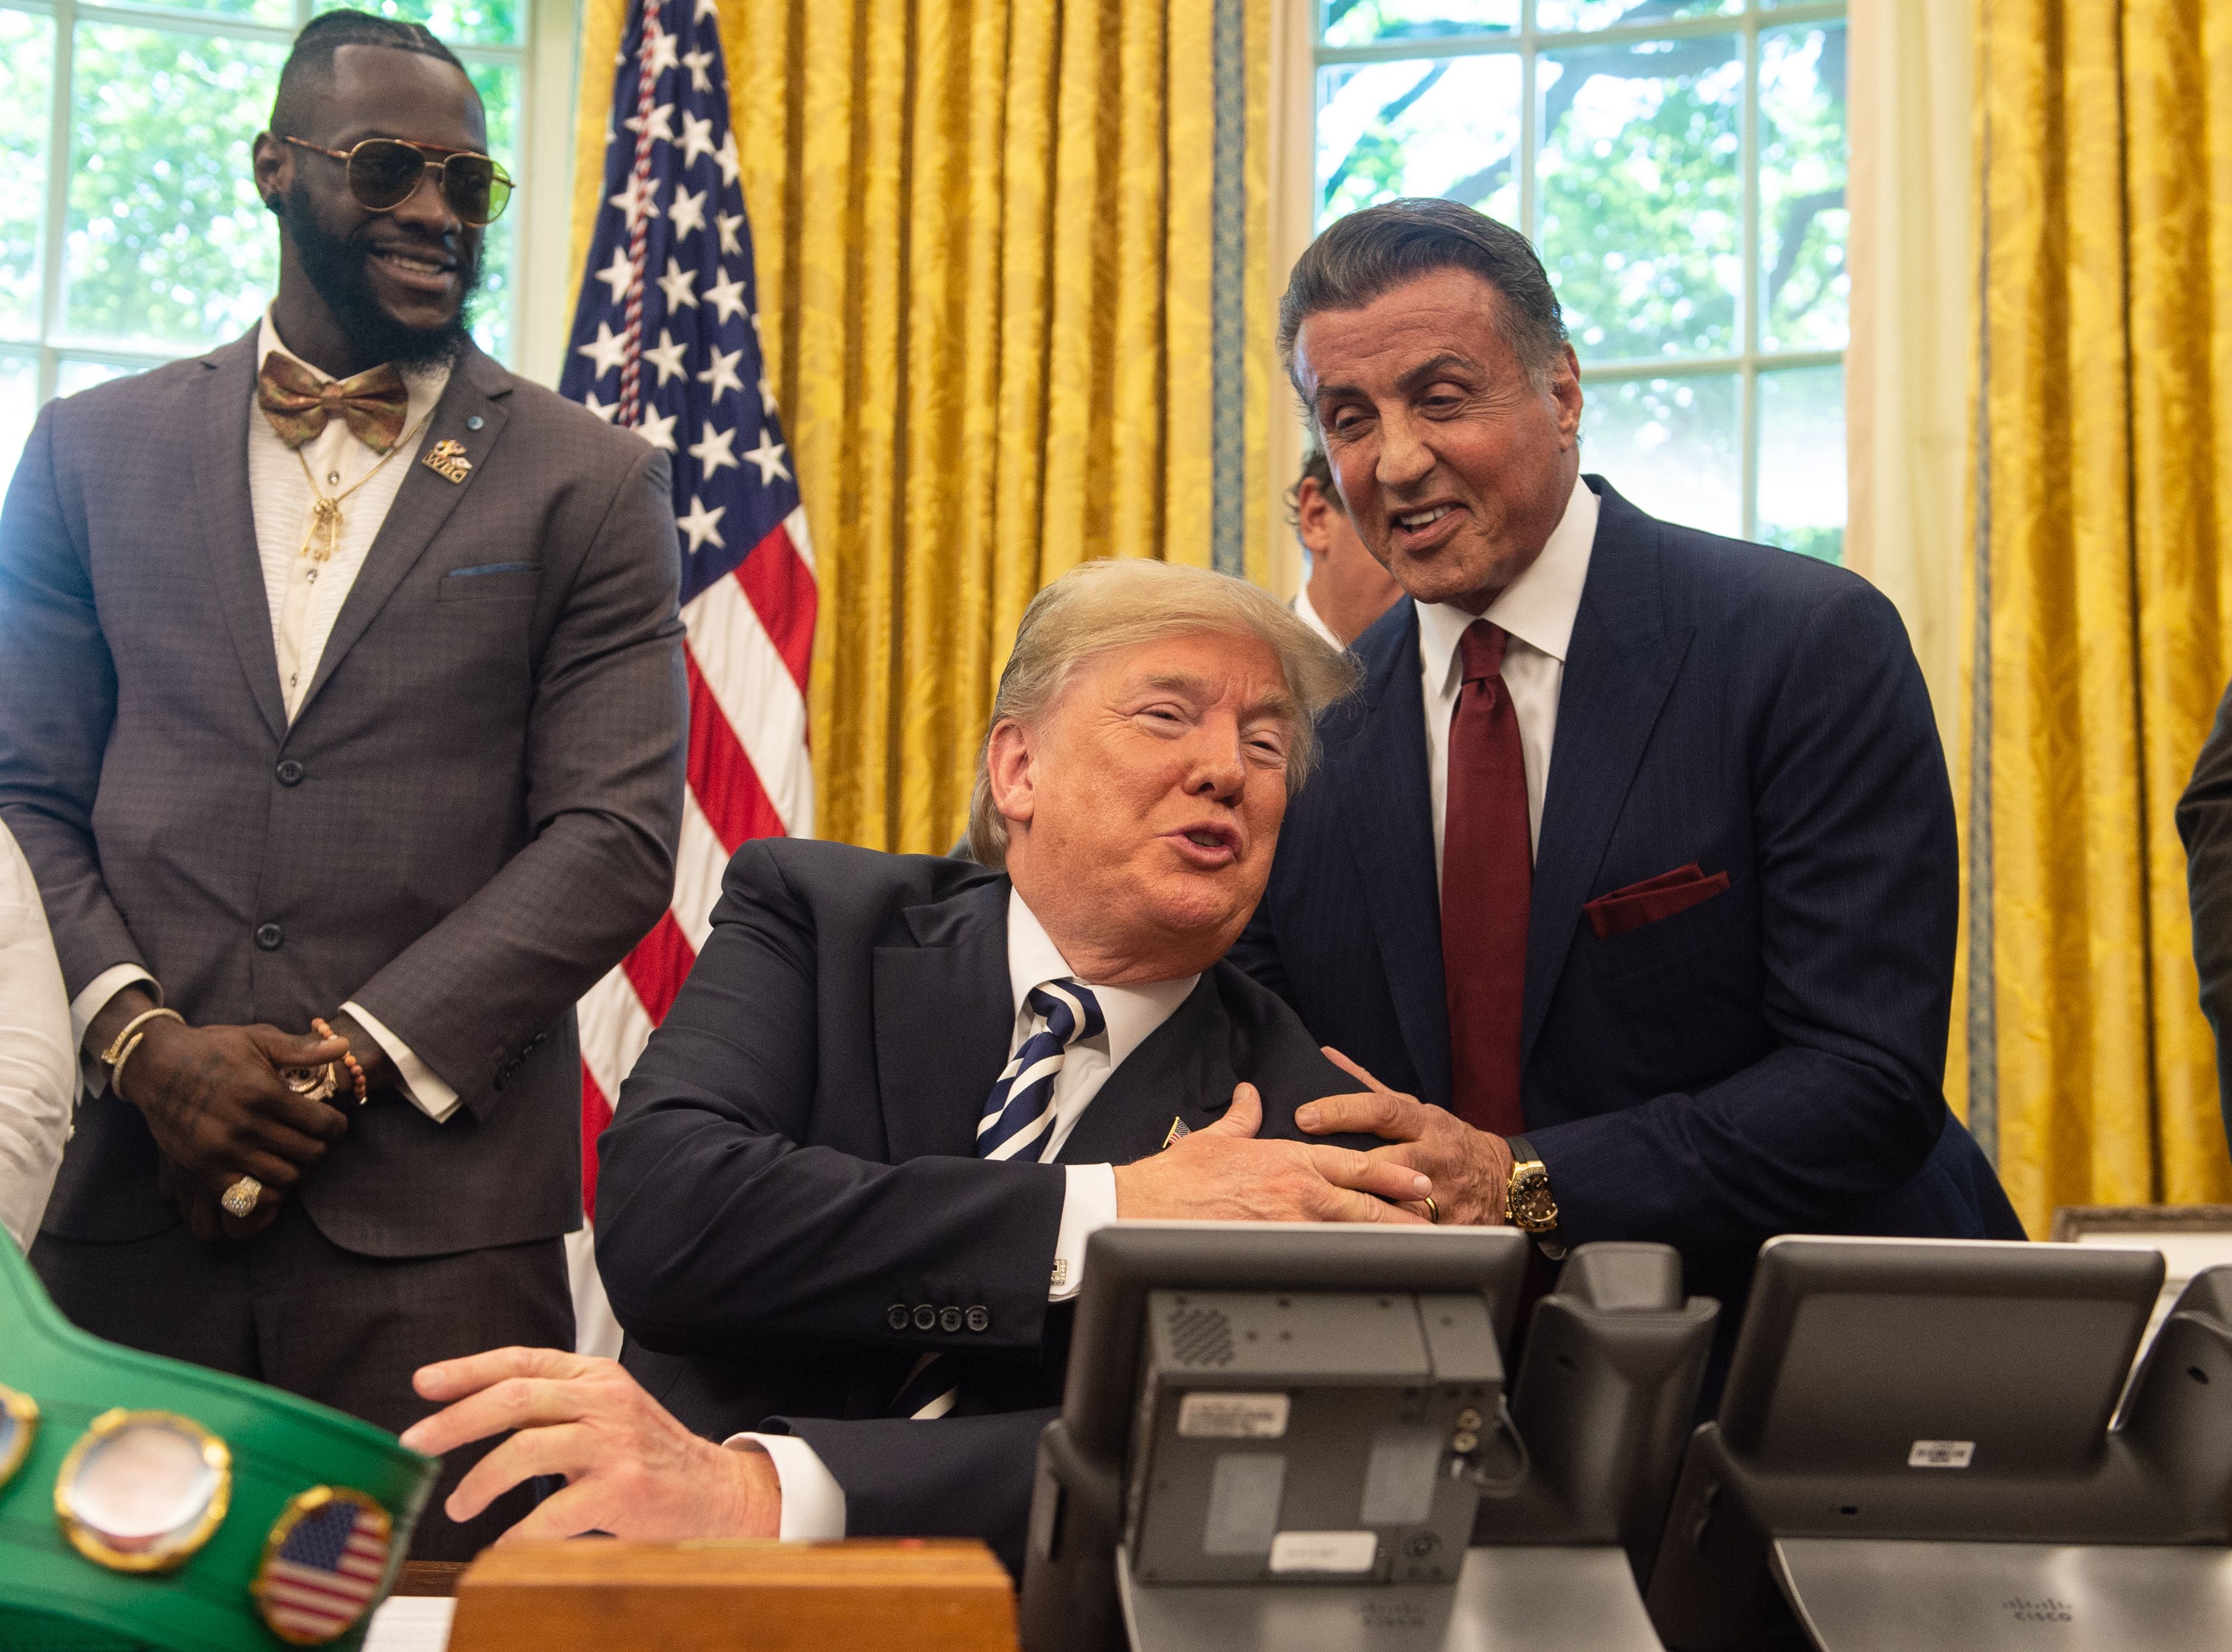 President Donald Trump jokes with actor Sylvester Stallone(R) before signing a posthumous pardon for former world champion boxer Jack Johnson in the Oval Office at the White House in Washington, DC, on May 24, 2018, as boxer Lennox Lewis looks on. (NICHOLAS KAMM / AFP/Getty)  